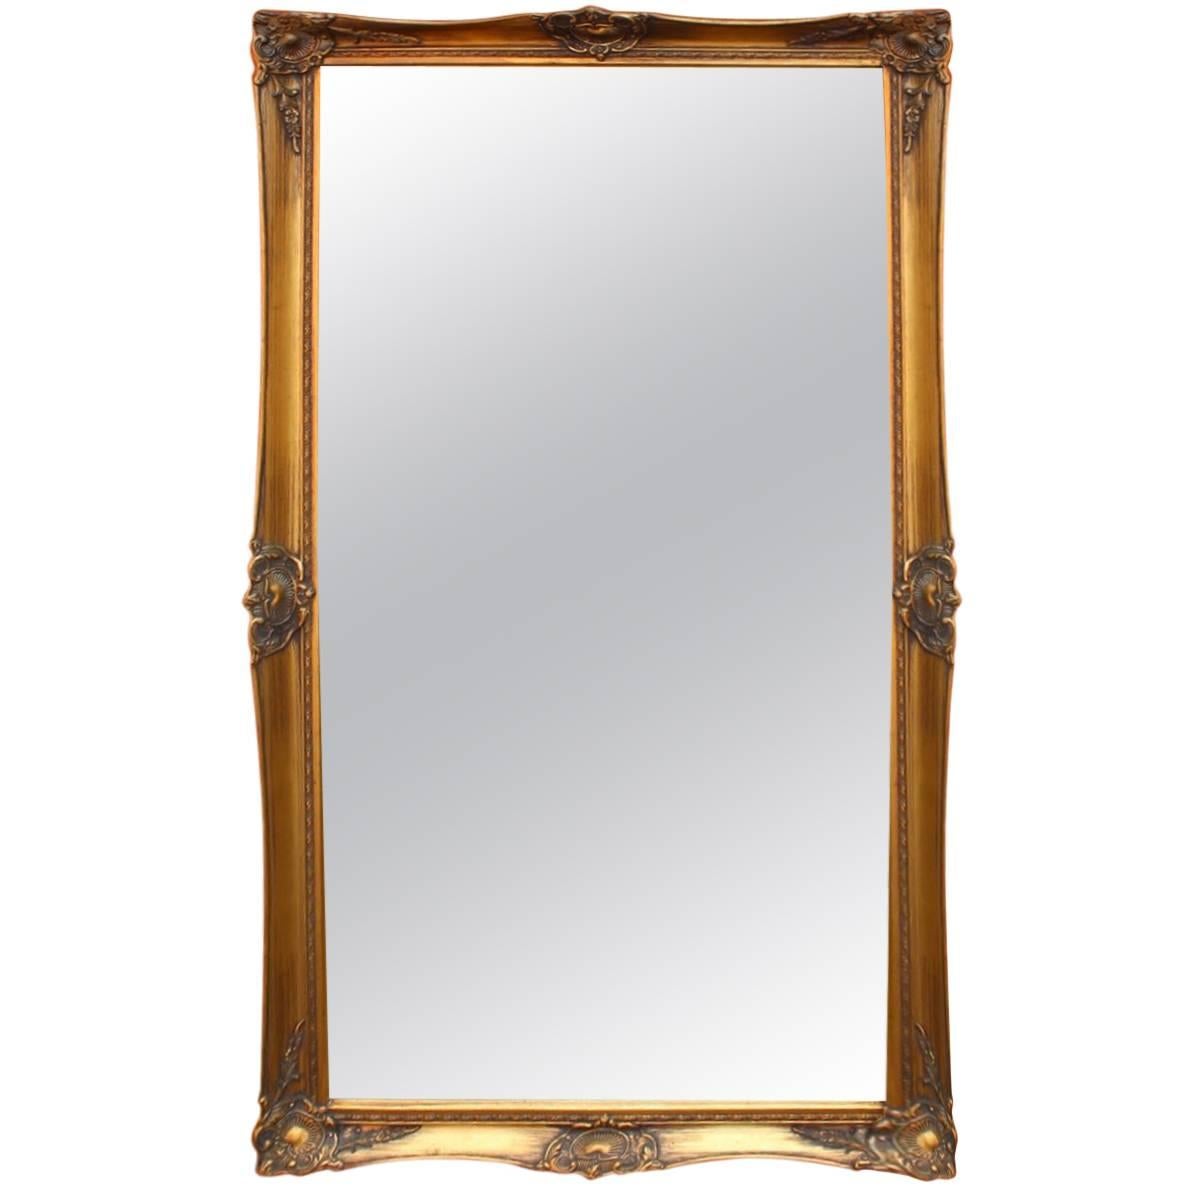 Large Mirror with a Gilded Frame from Around the 1930s